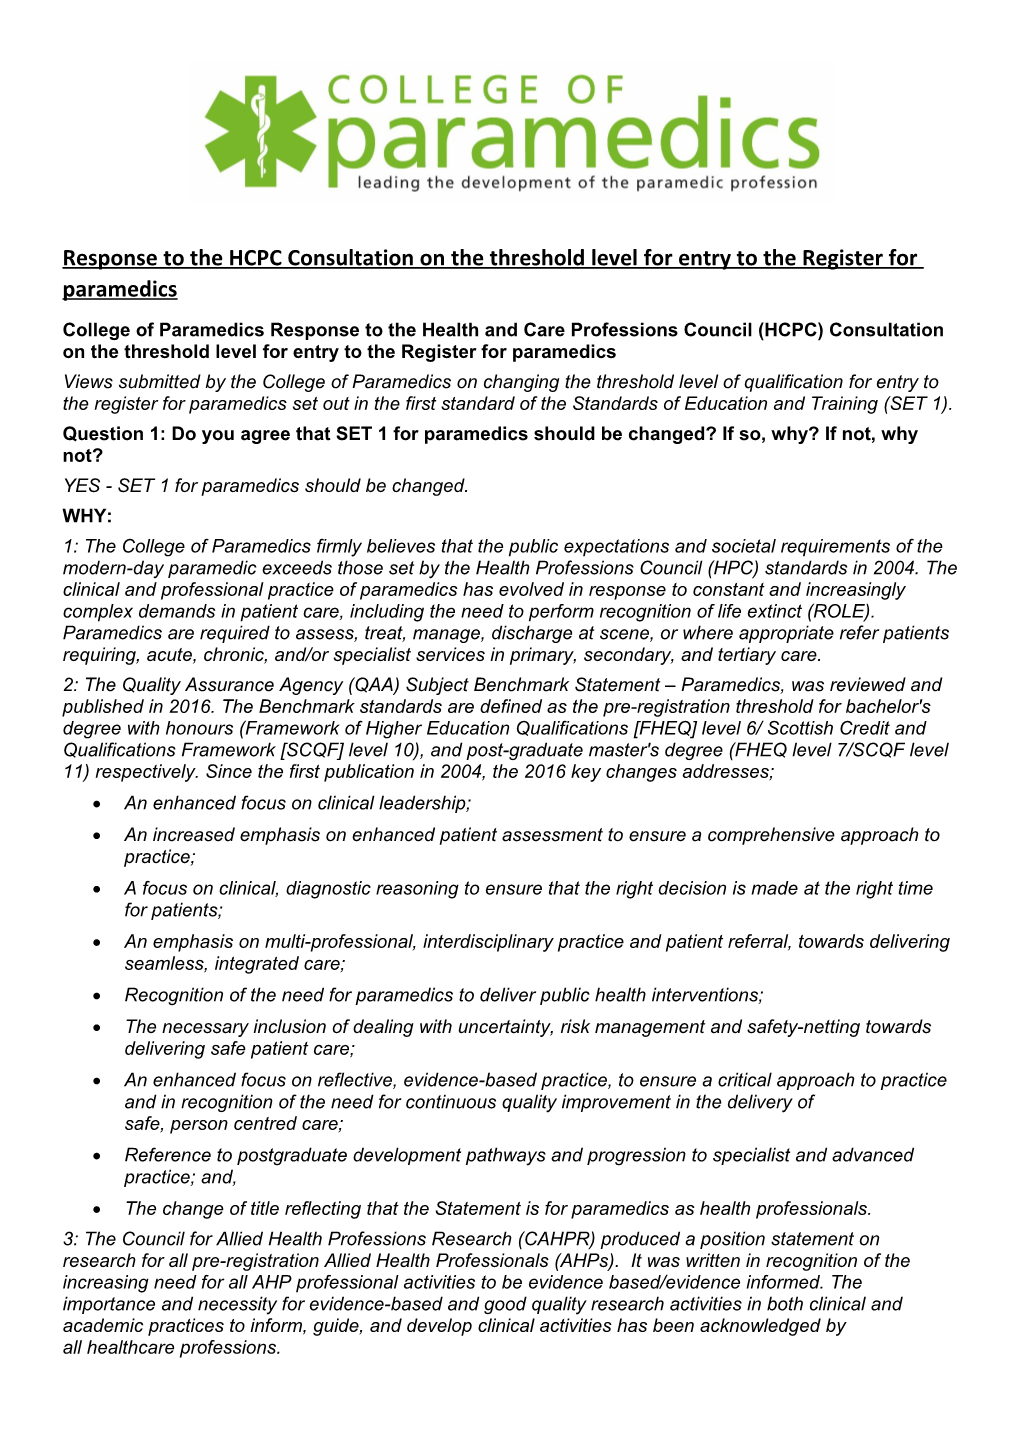 Response to the HCPC Consultation on the Threshold Level for Entry to the Register For